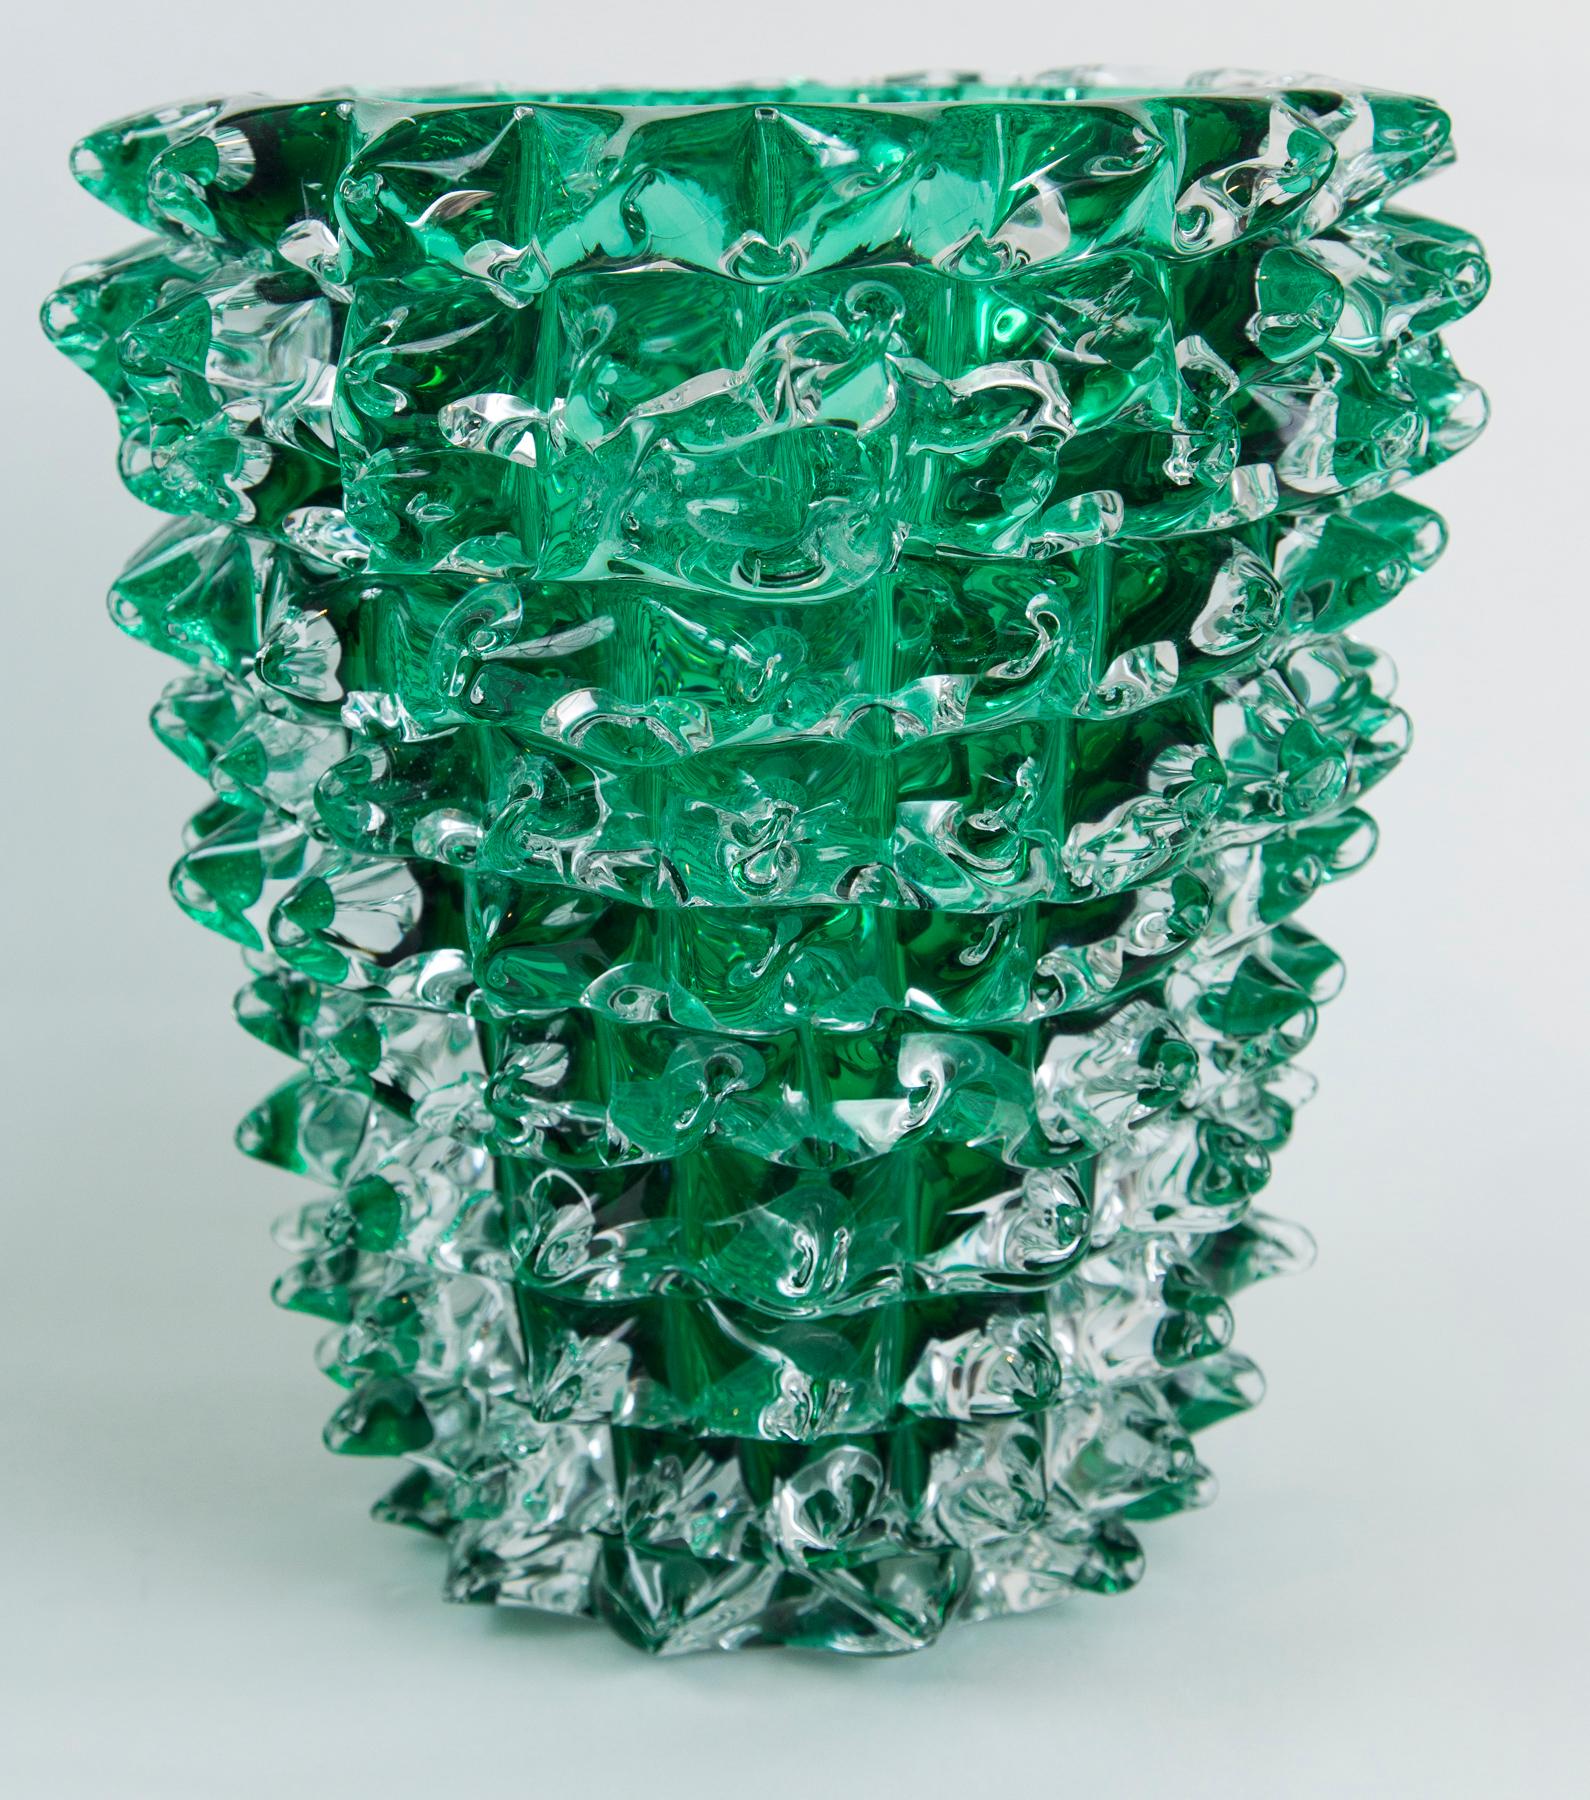 Paolo Crepax Murano green glass vase signed 